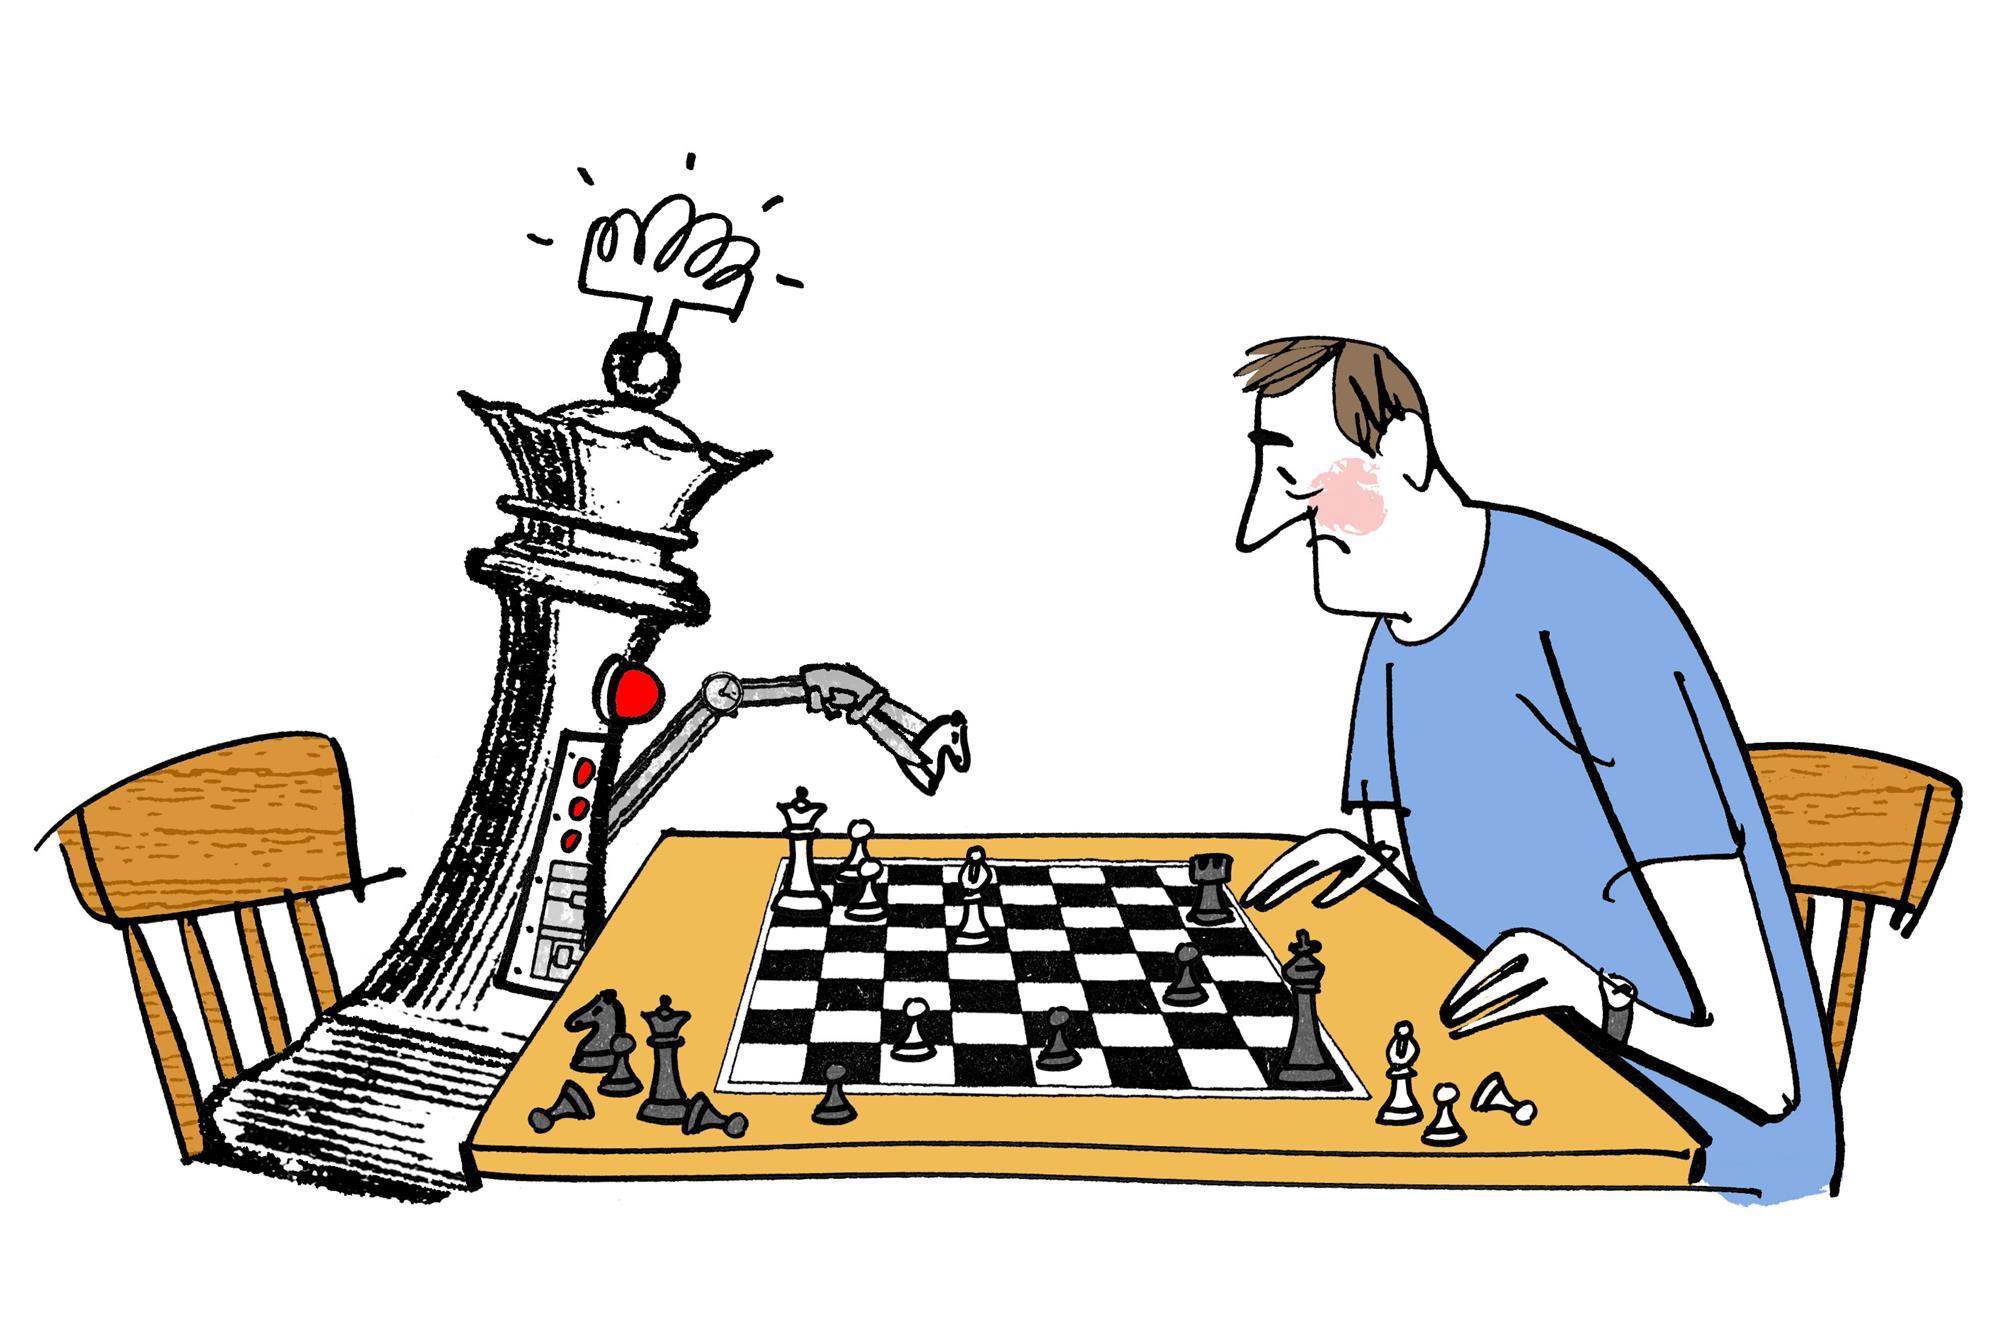 The Queen's Gambit: Why is everyone suddenly talking about chess